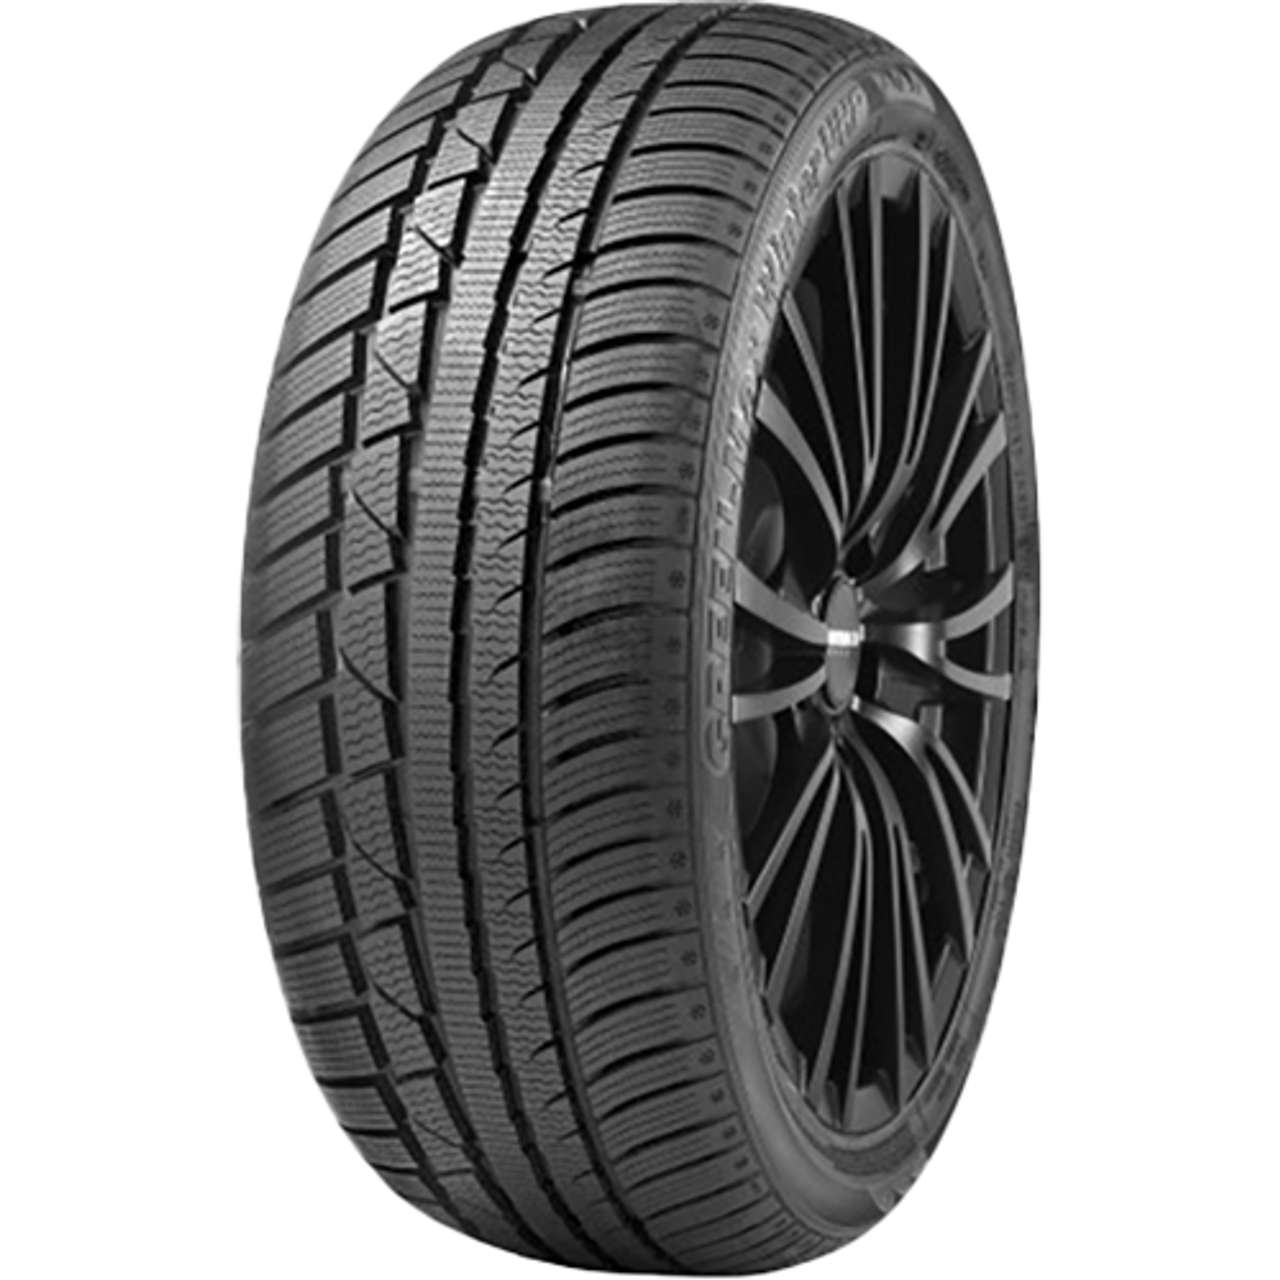 LINGLONG GREEN-MAX WINTER UHP 225/55R16 99H MFS BSW XL